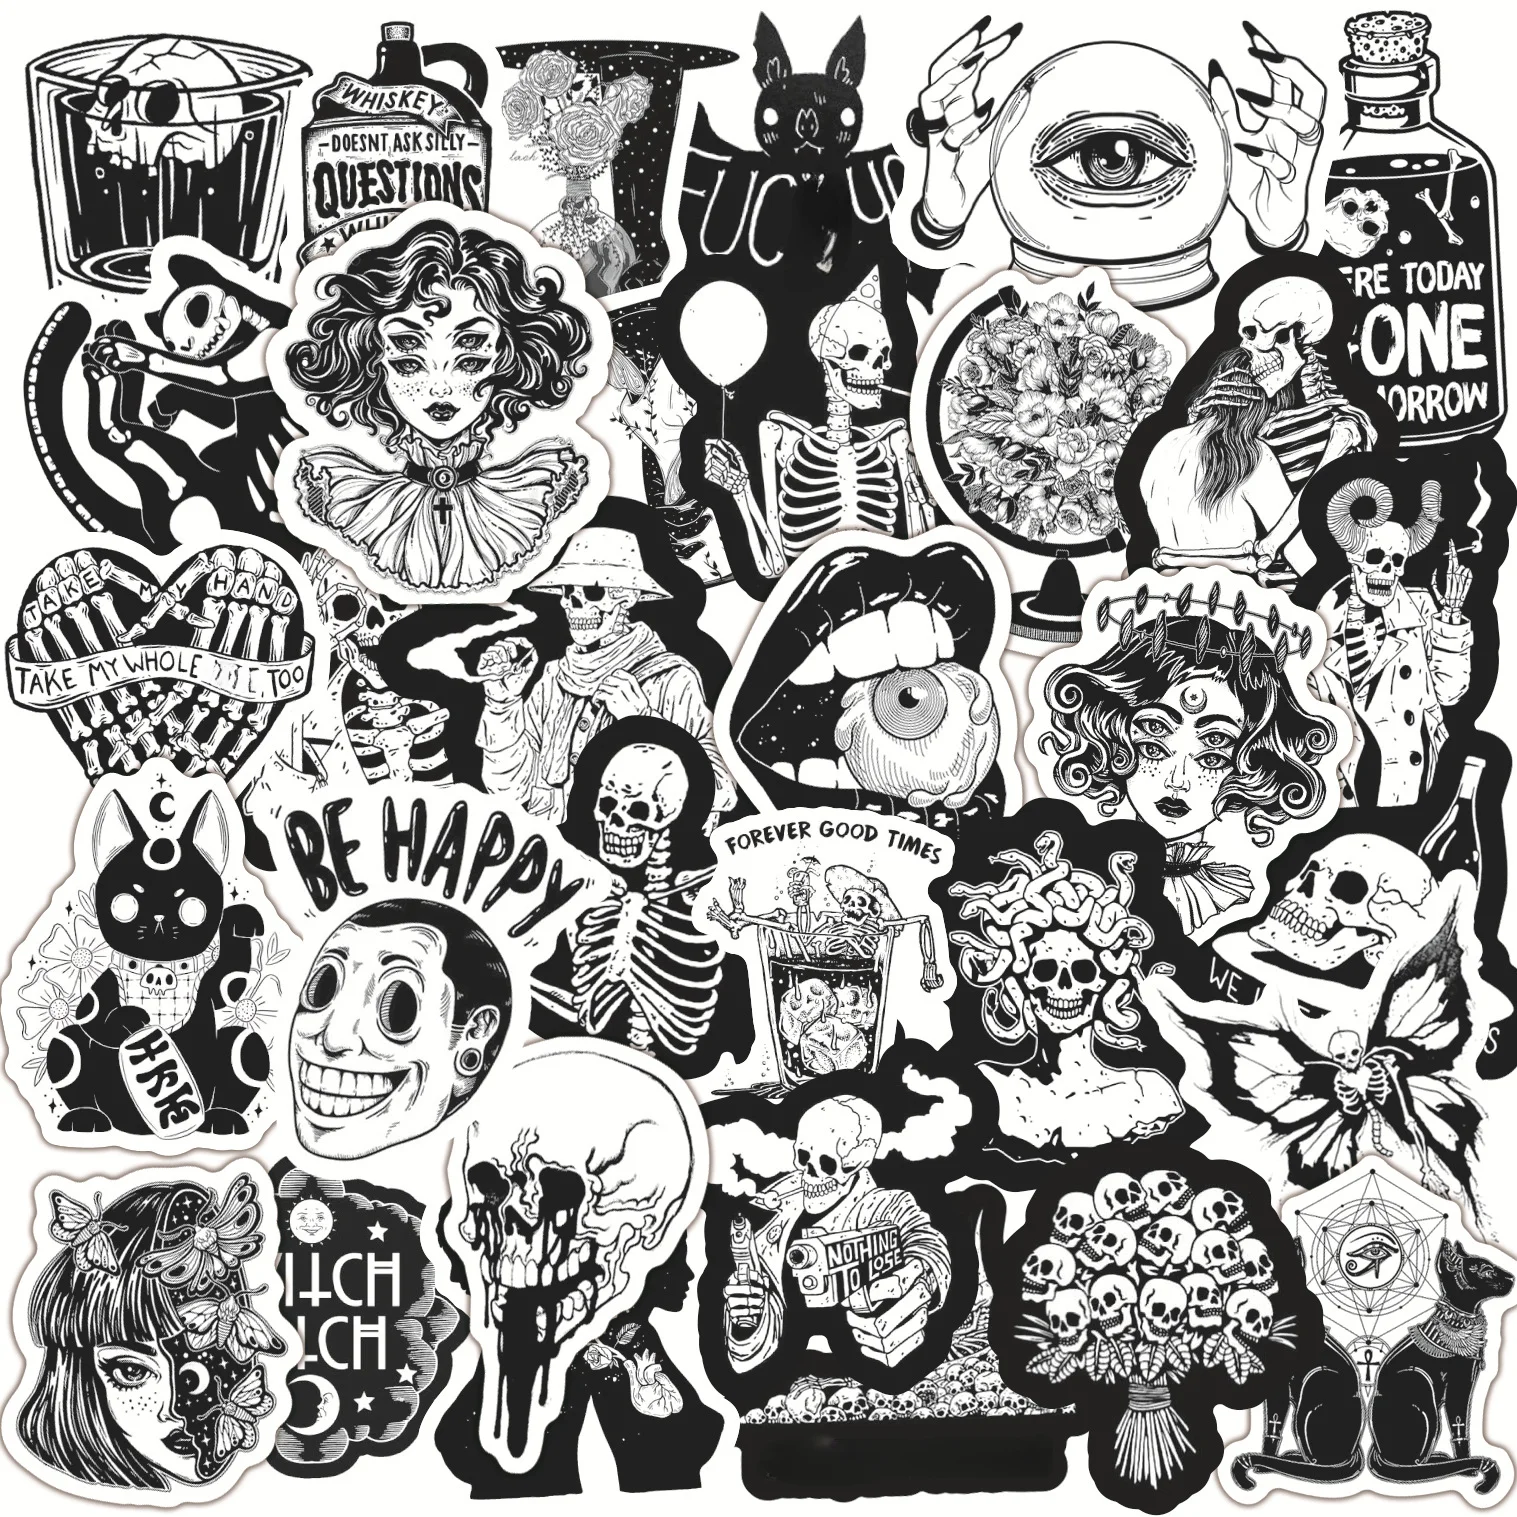 100PCS Mixed Black White Gothic Stickers Graffiti Motorcycle Skateboard Travel Phone Case Decal Toys Sticker Waterproof american letter and mother graffiti jeans men s and women s jeans loose straight tube dark black versatile casual pants denim